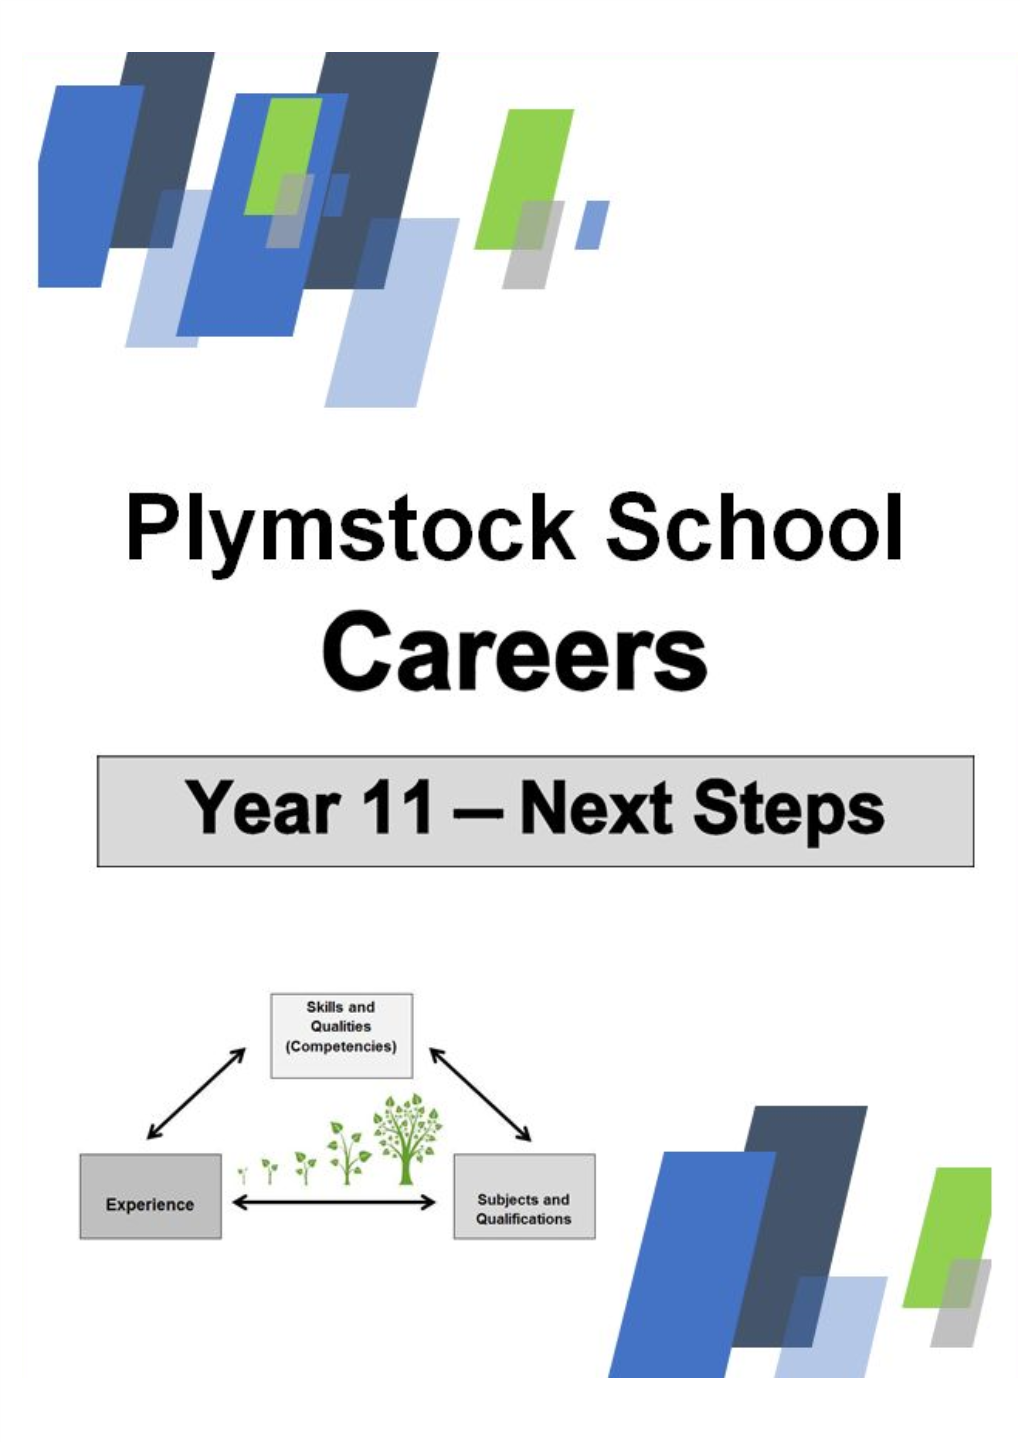 Plymstock School We Recommend That All Students Have a Preferred Option and a Realistic Backup Plan